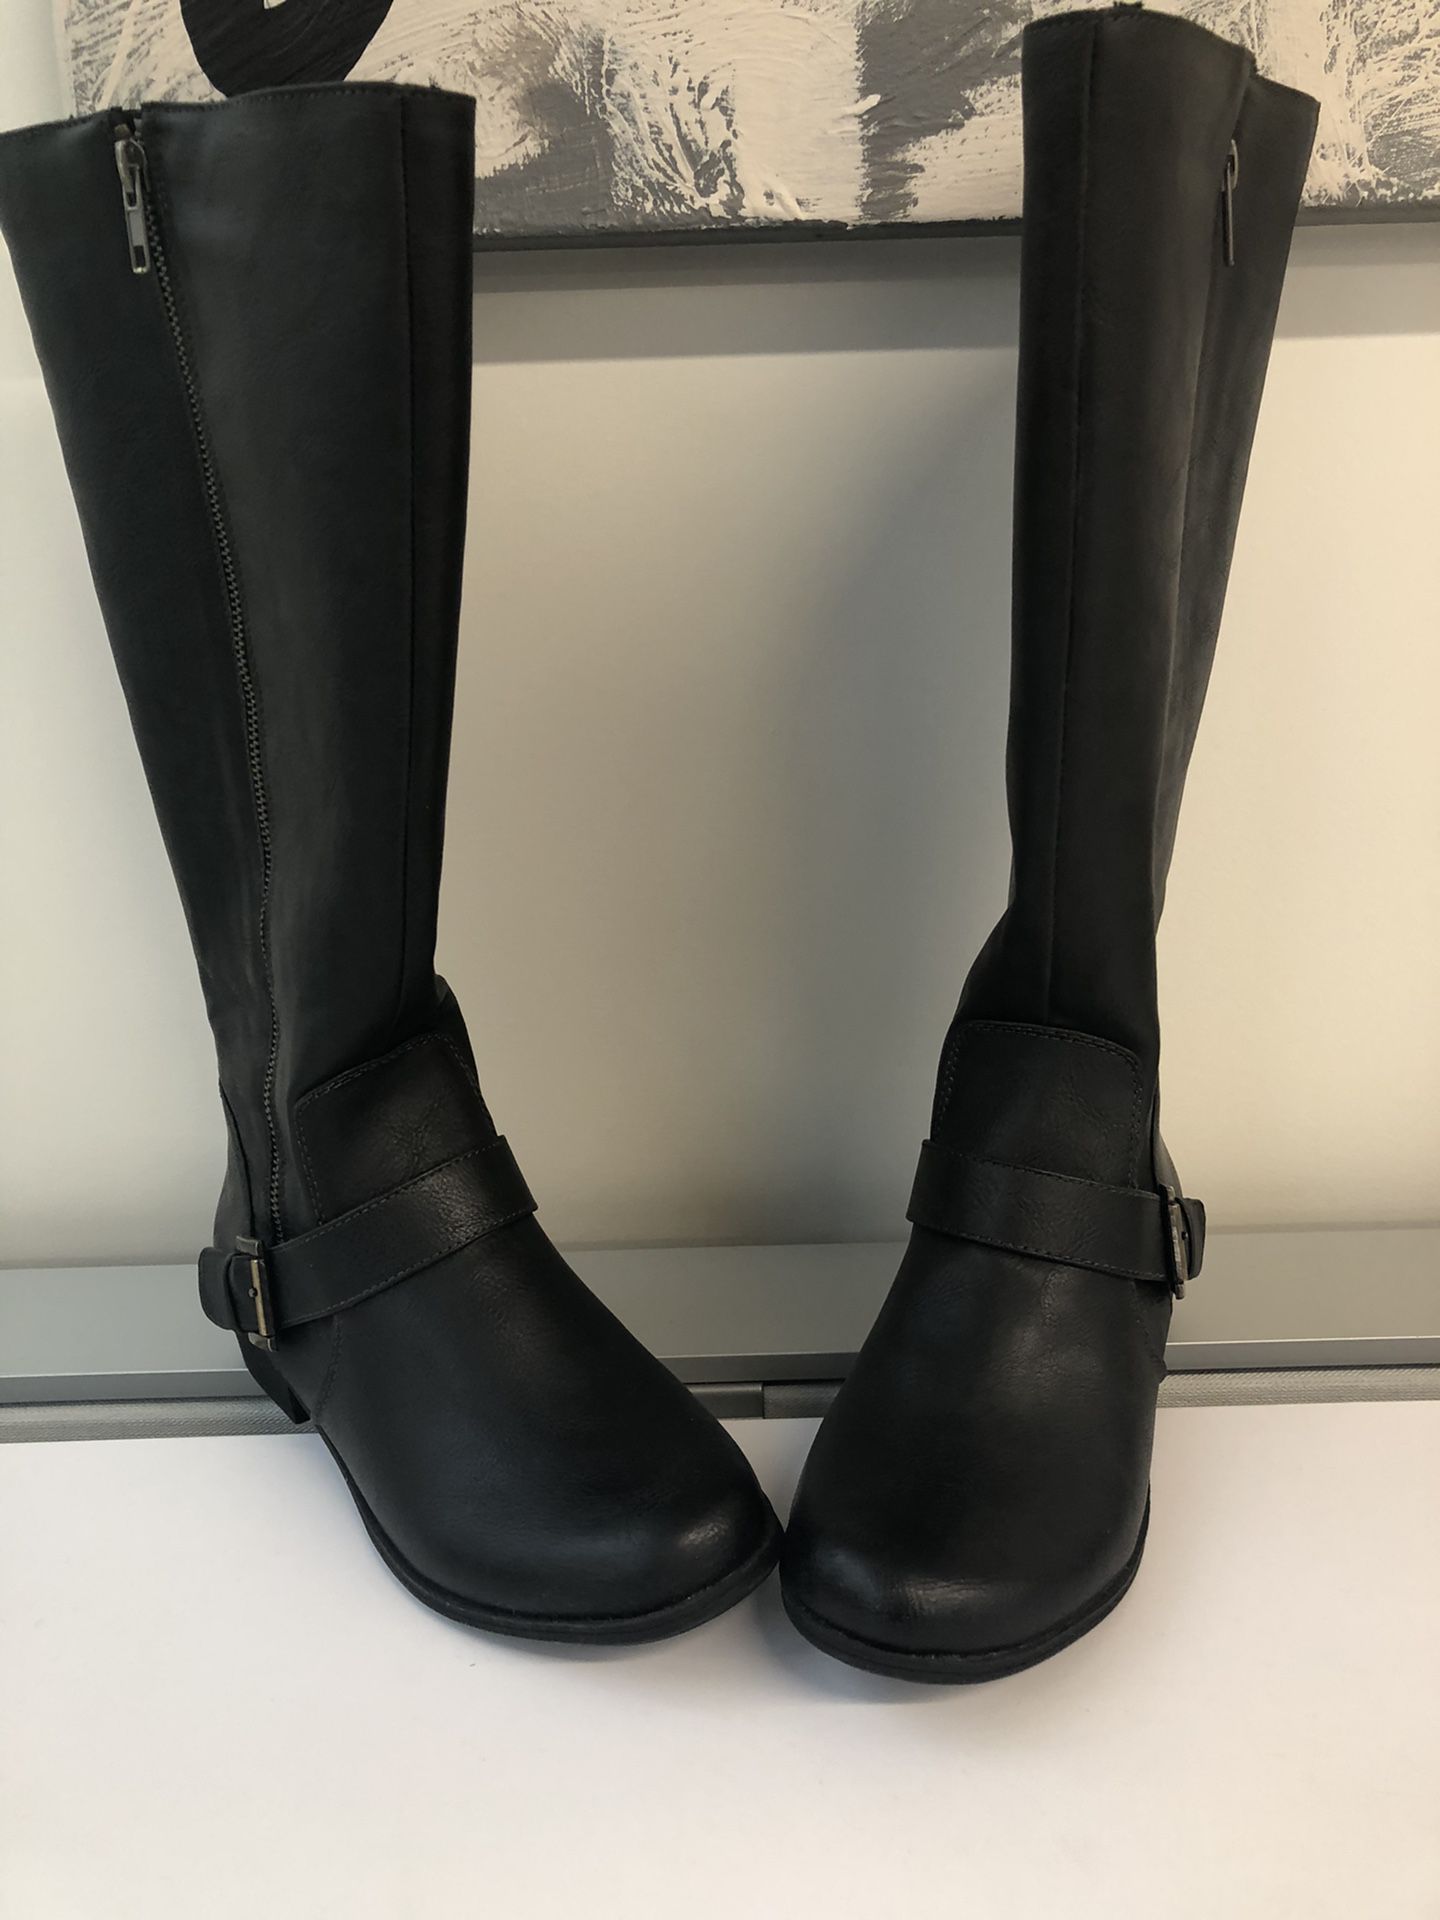 New Aerosoles brand leather tall black boots, size 7.5